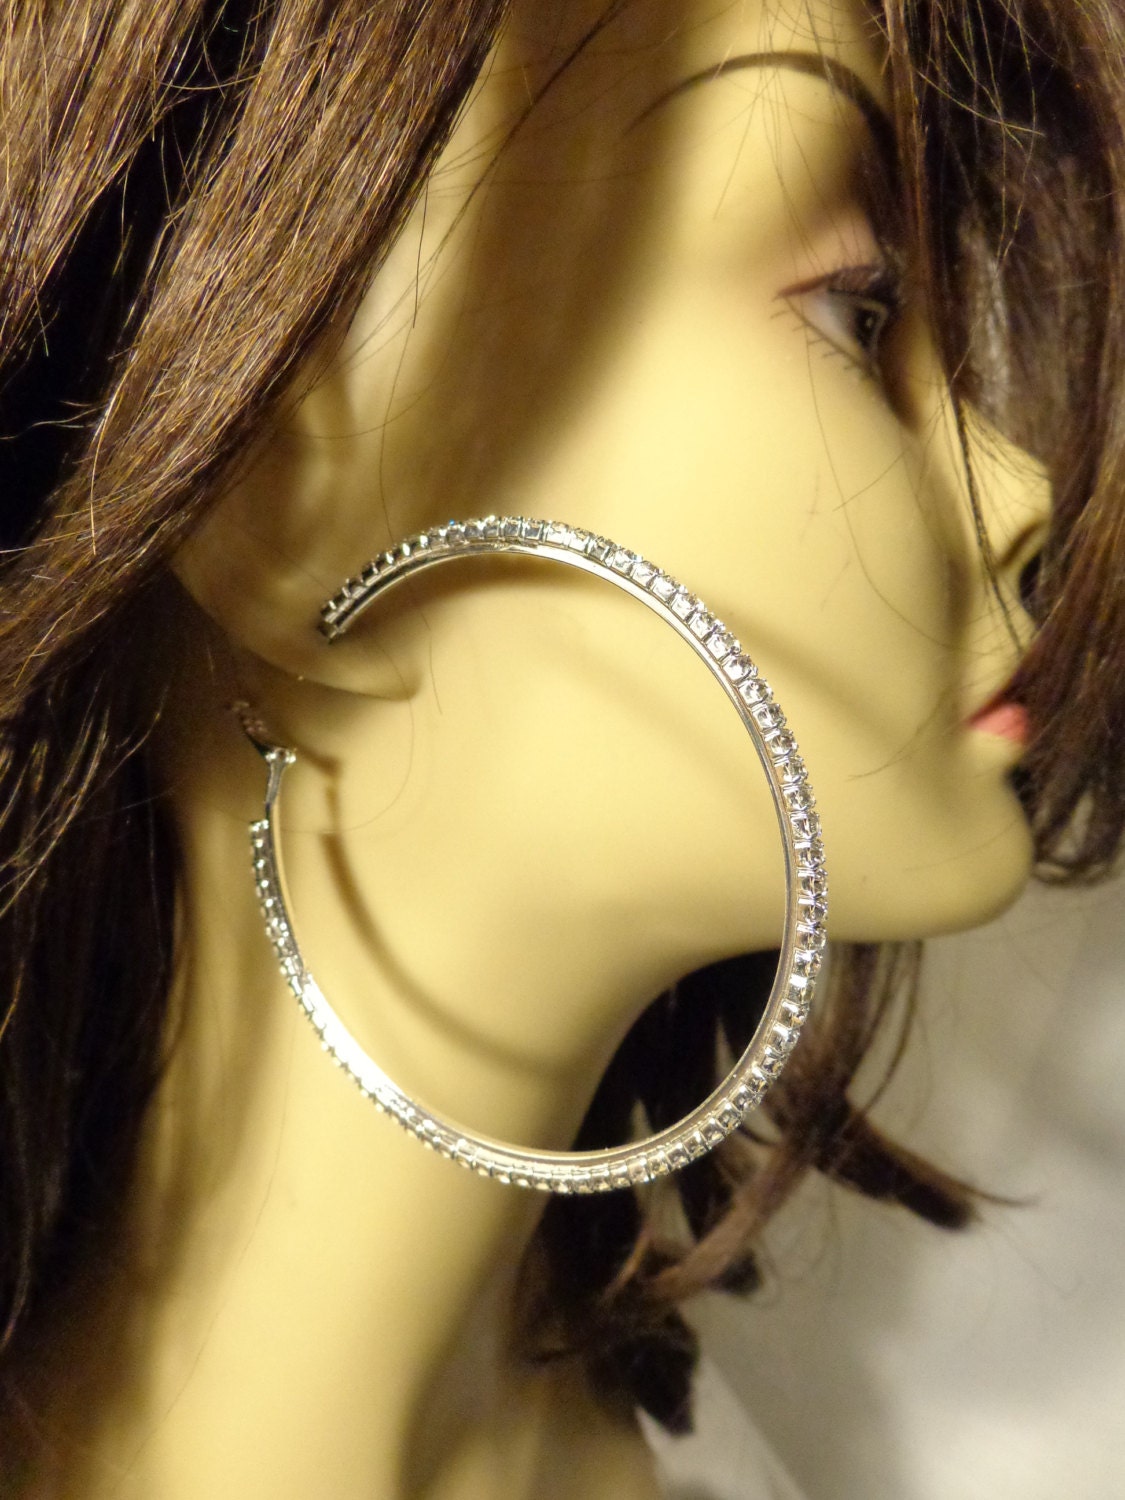 Hoop Earrings- Silver Toned Super Thin for Adding Beads for Jewelry Making  Craft 